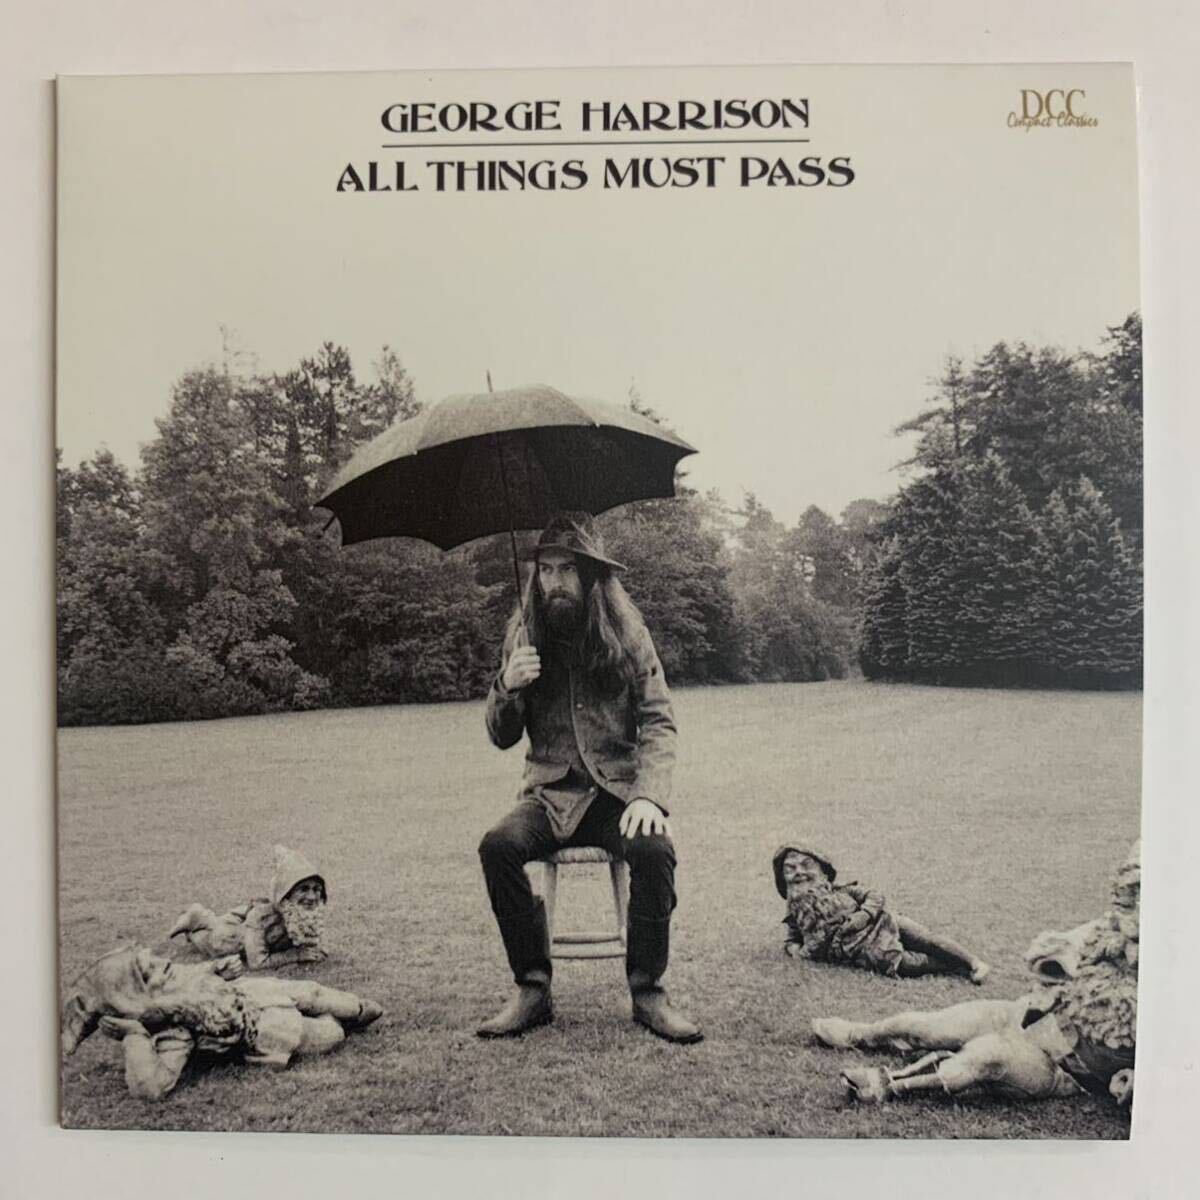 GEORGE HARRISON / ALL THINGS MUST PASS DCC COMPACT CLASSICS Remastered by Steve Hoffman (CD) это милый бумага жакет specification *